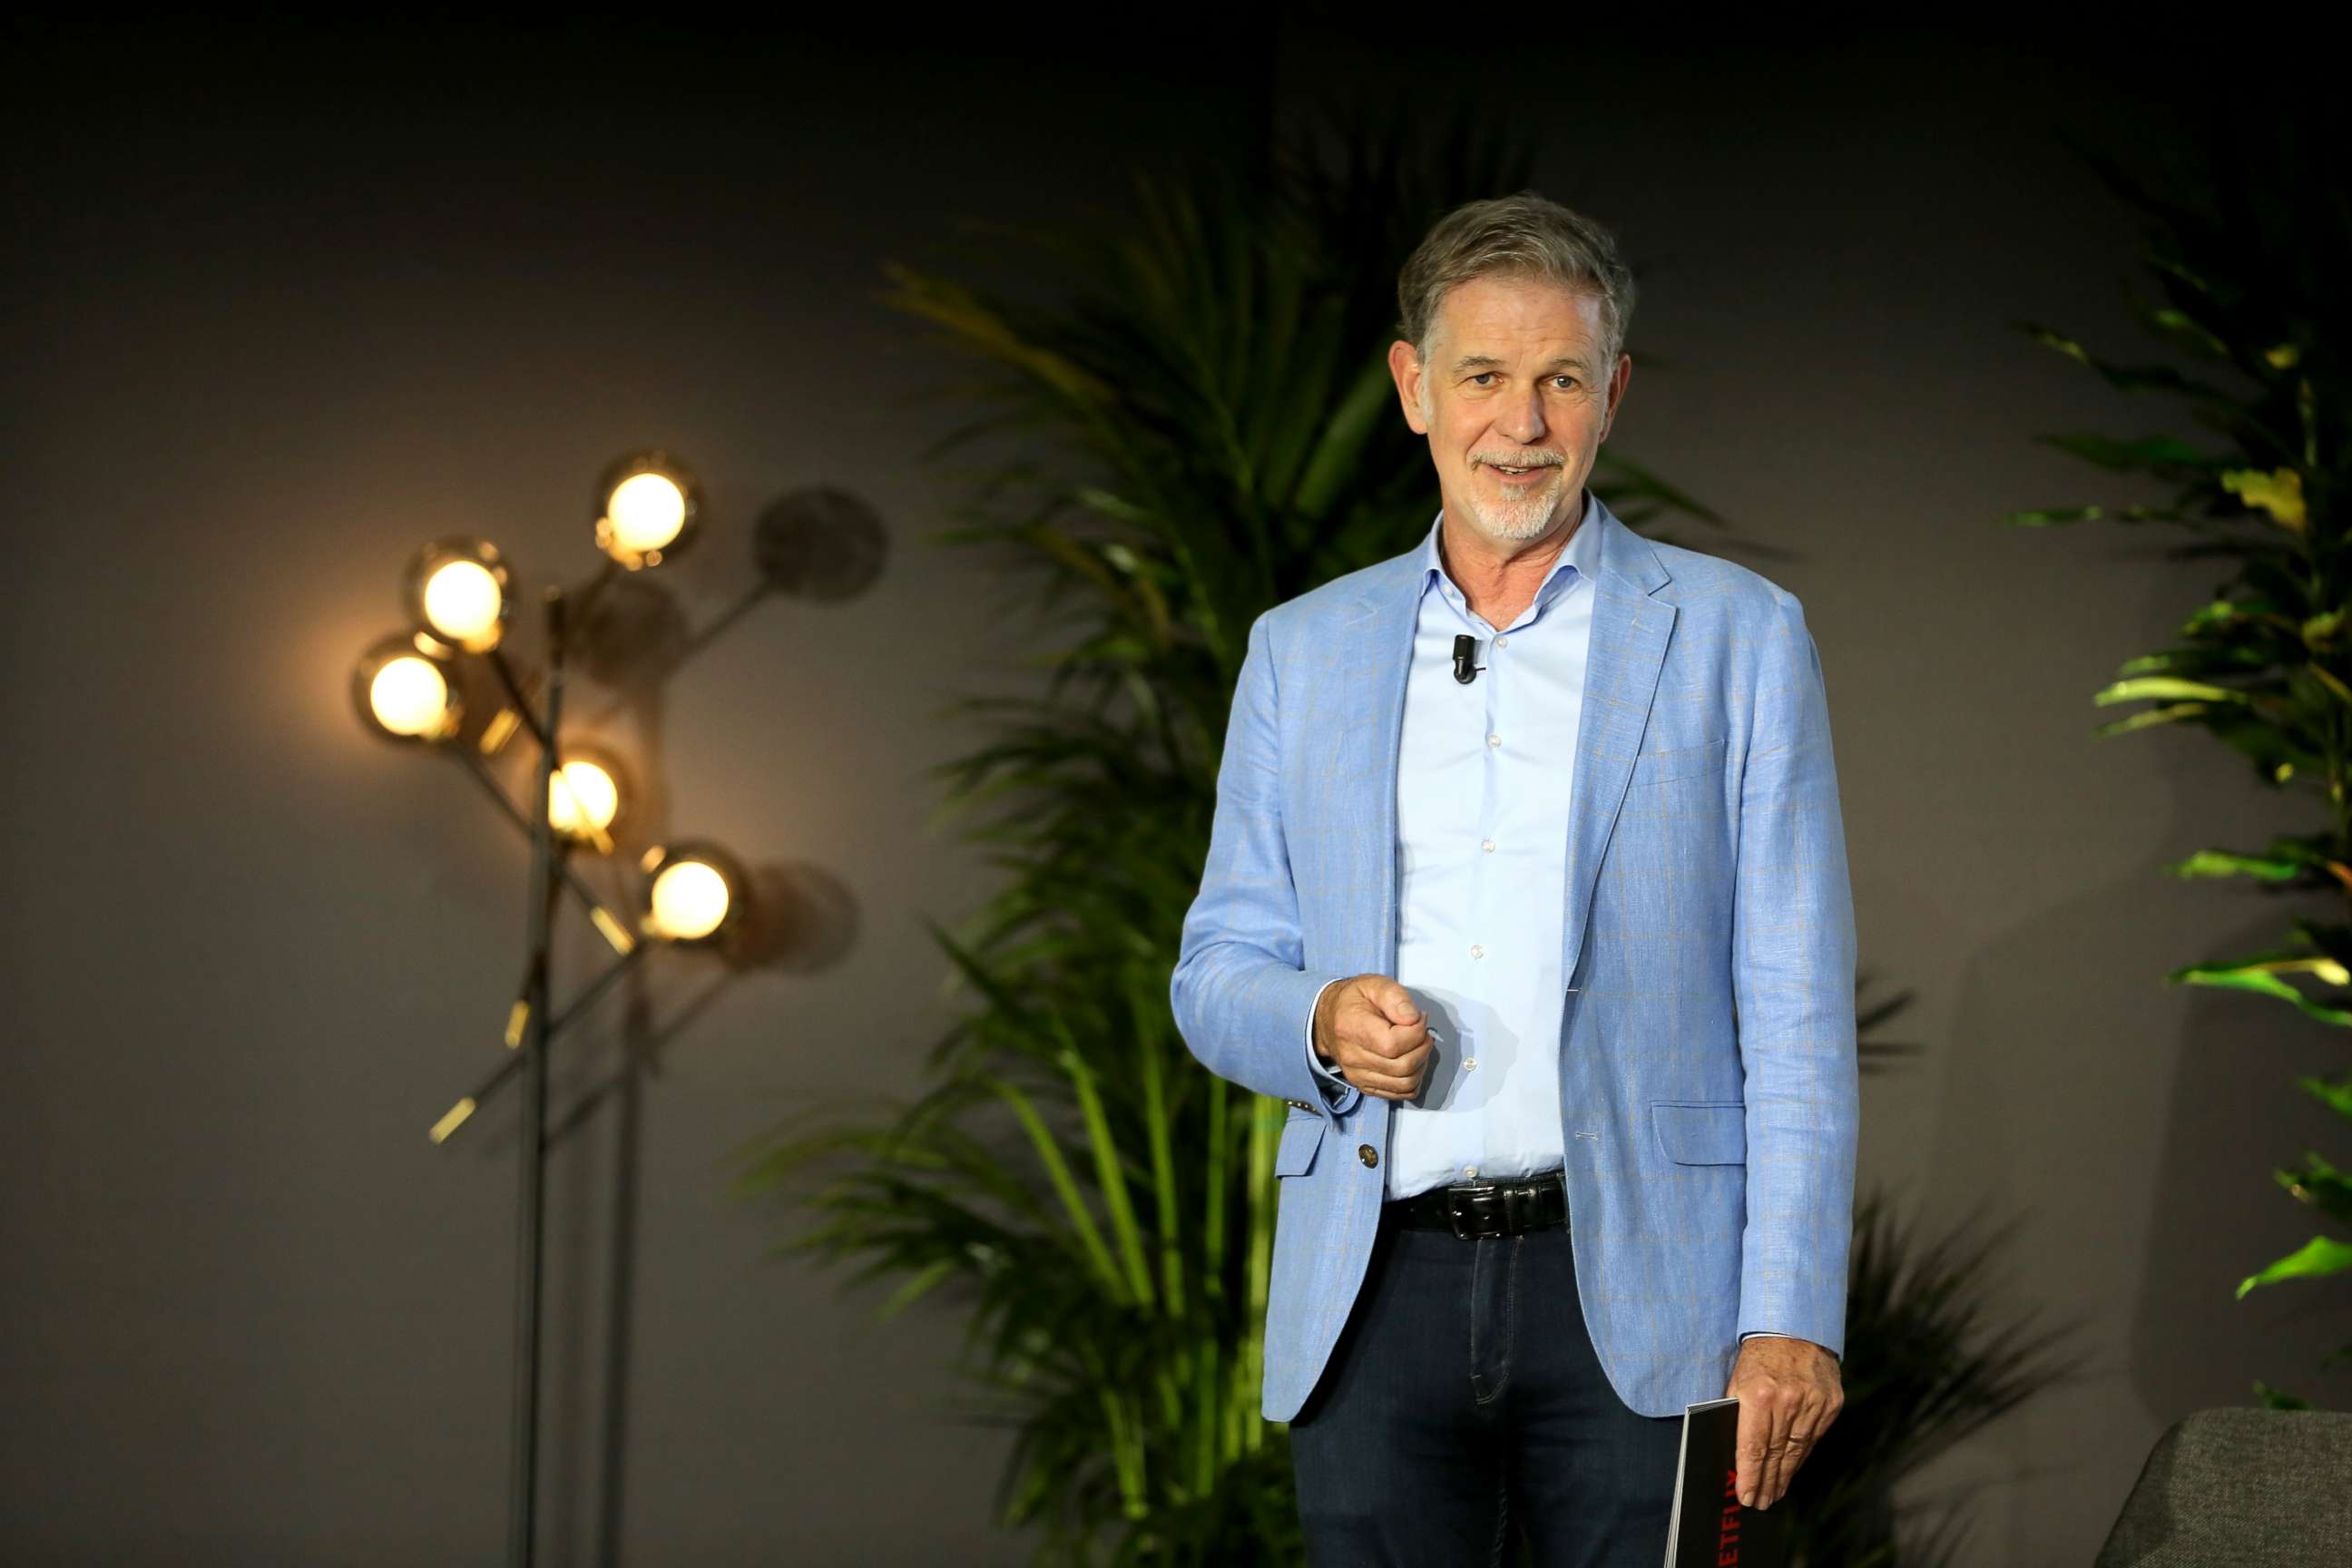 PHOTO: Reed Hastings attends the Netflix & Mediaset Partnership Announcement, Oct. 8, 2019.